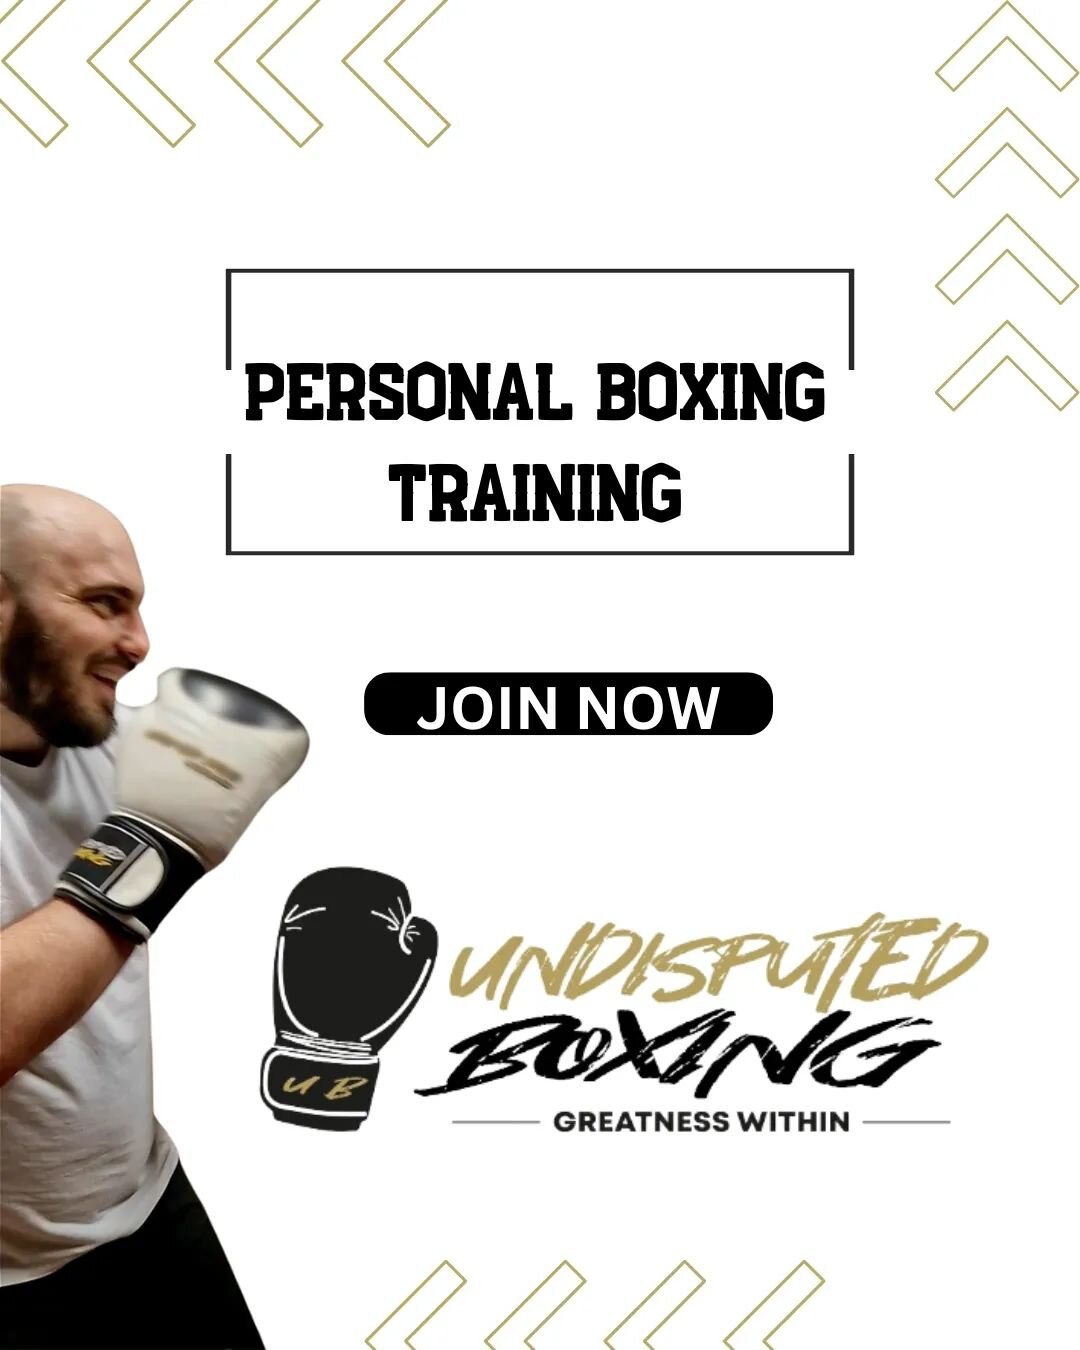 Join now to get your first PBT session on us! Follow the link below 

www.undisputed-boxing.com/signup

#boxingtraining #boxinggym #boxing #personaltraining #nottinghamboxinggym #signup #boxer #learnhowtobox #hucknallboxing